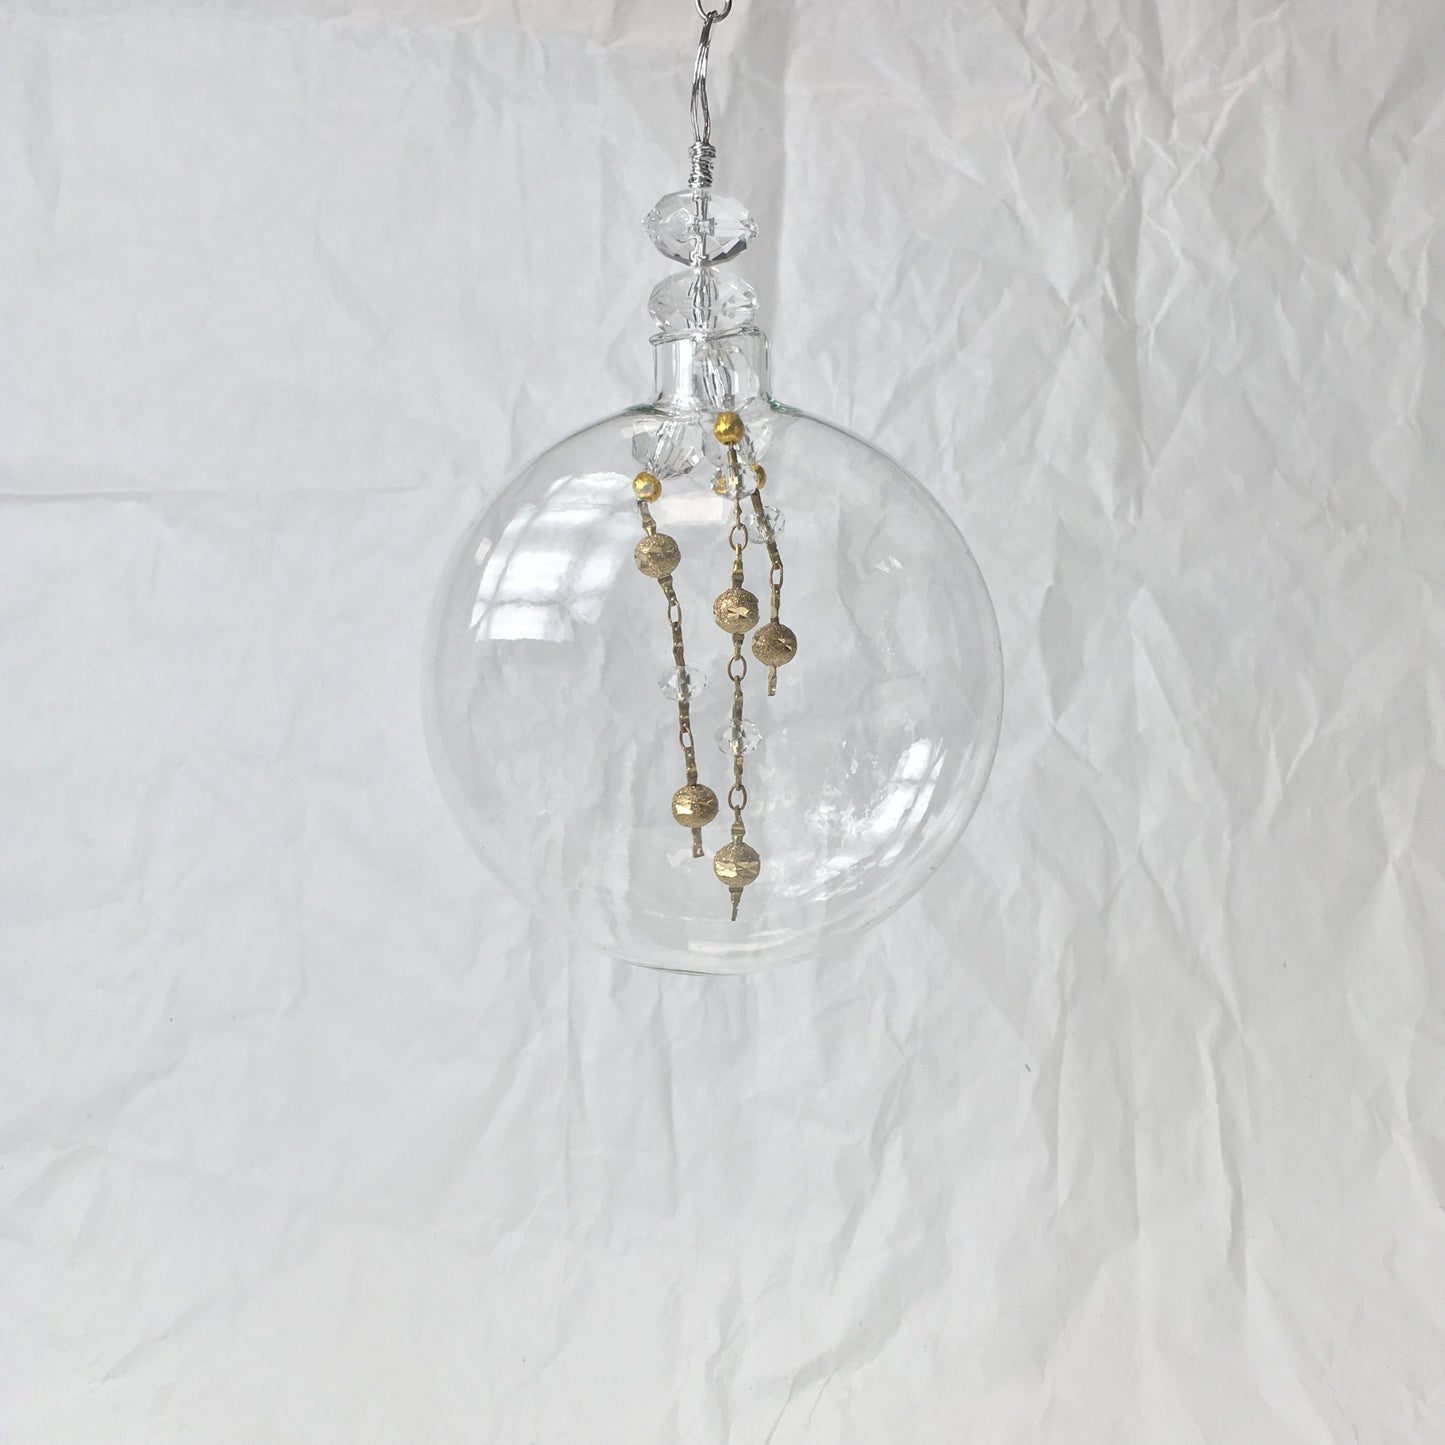 Clear Handmade Glass Decorations with Brass and Clear Beads for Christmas and Wedding Decorating